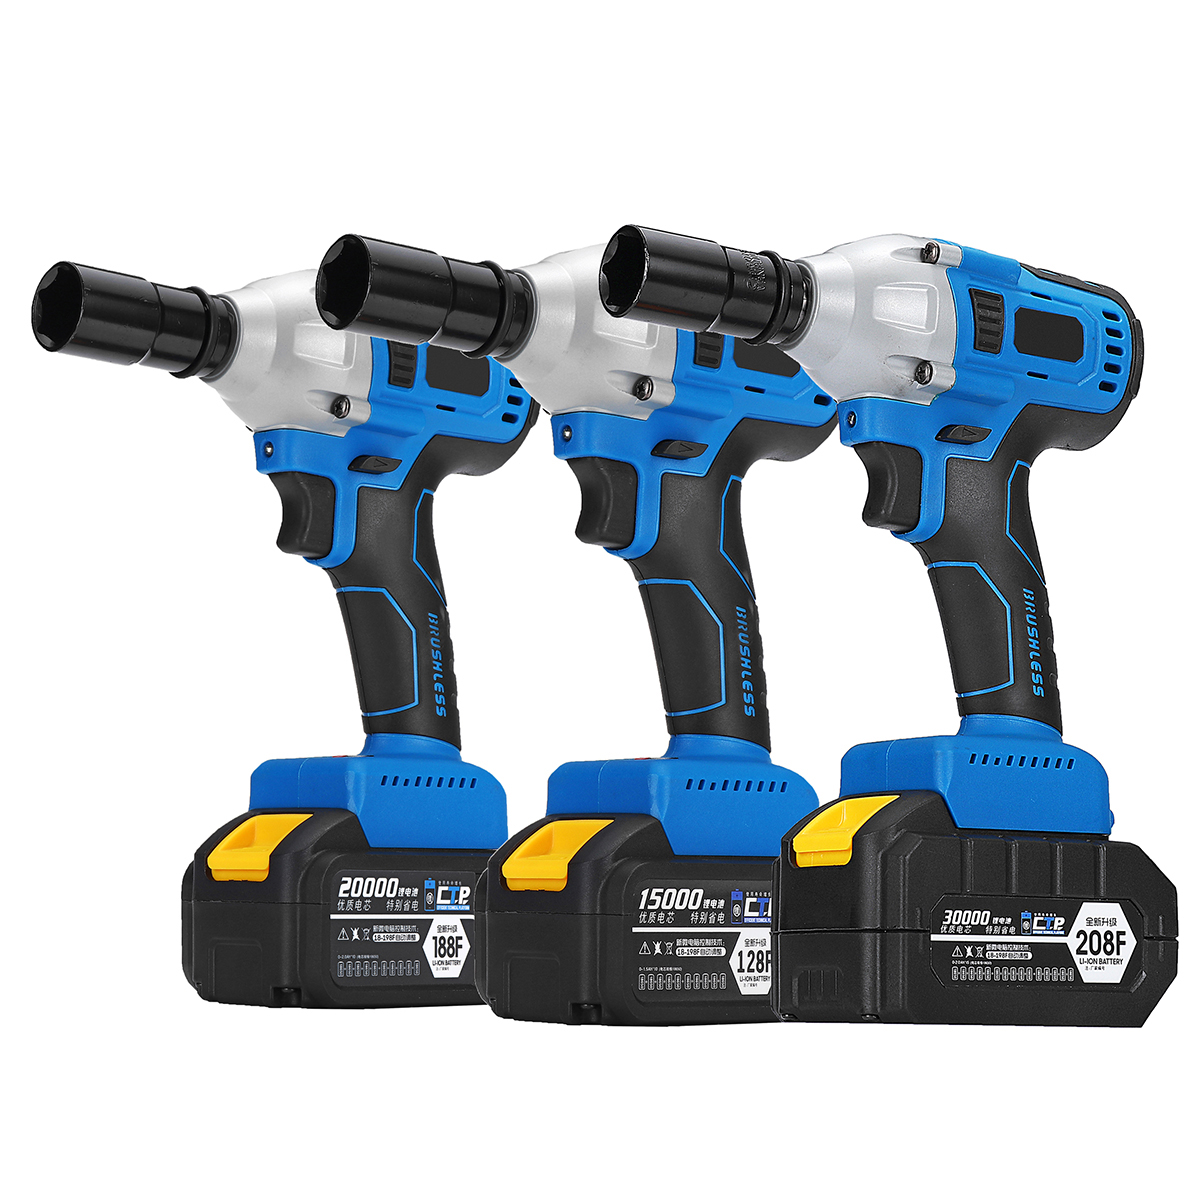 15000-30000mAH-Cordless-Impact-Wrench-Brushless-Electric-Wrench-12-Socket-Tool-1369004-2